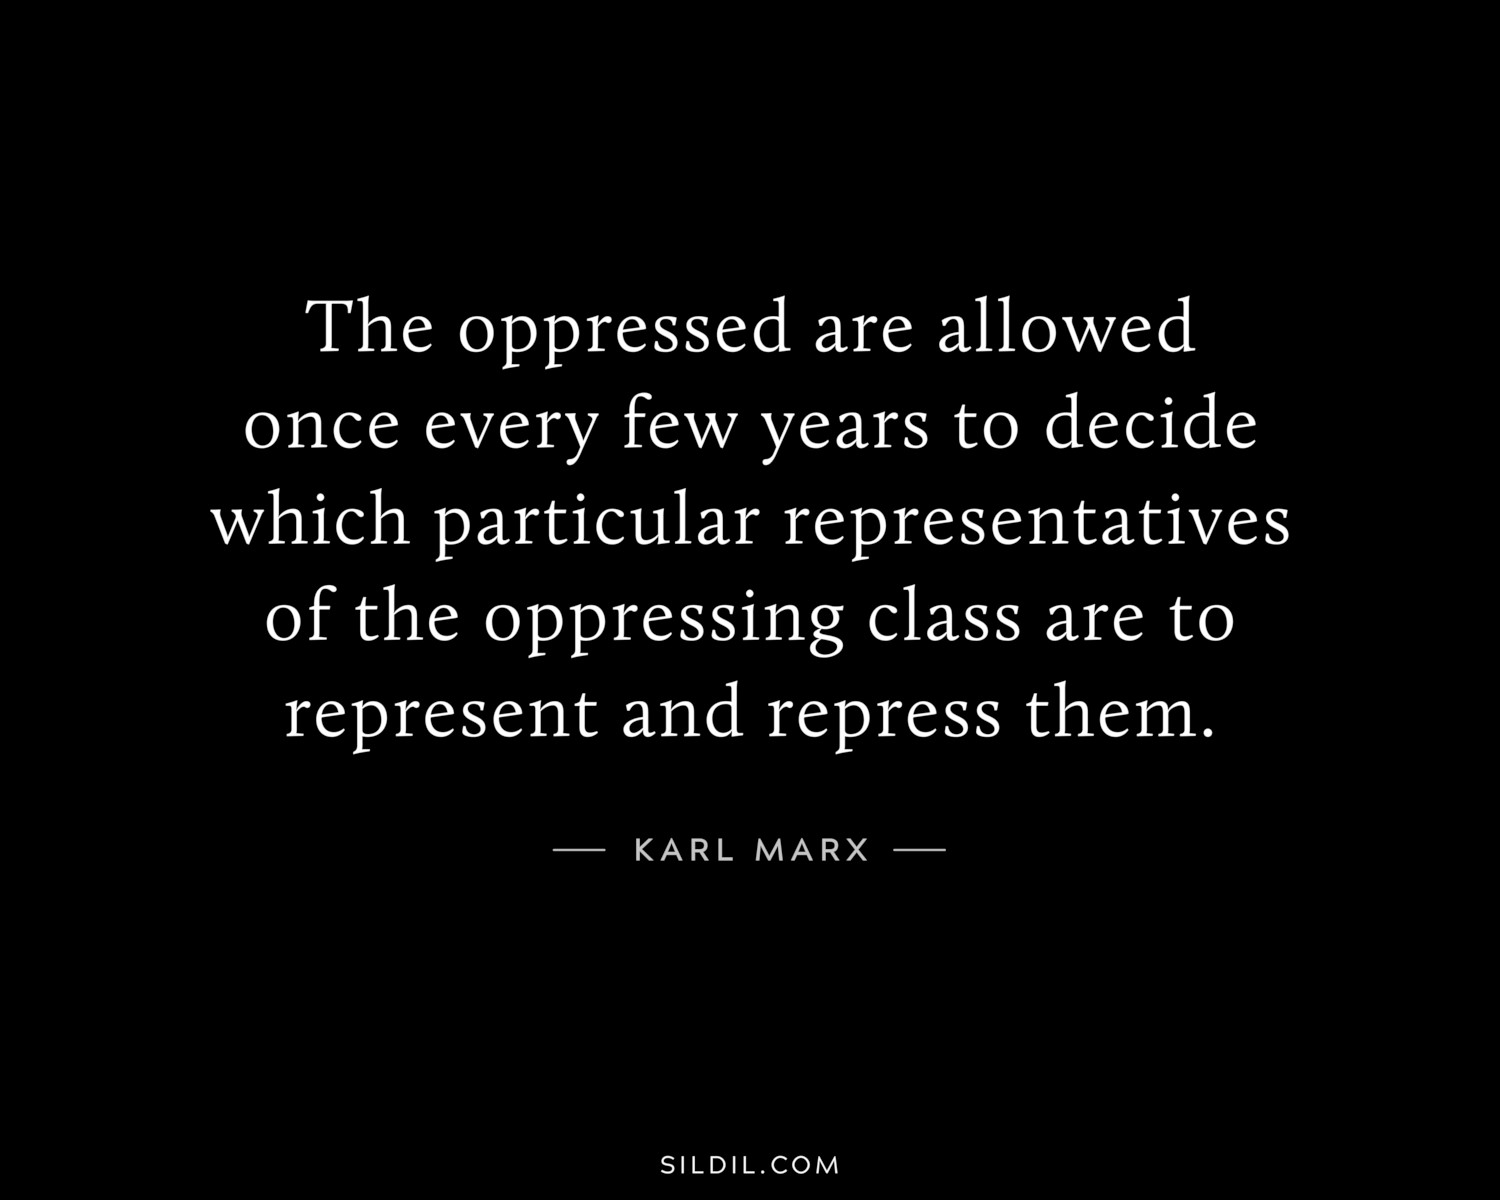 The oppressed are allowed once every few years to decide which particular representatives of the oppressing class are to represent and repress them.